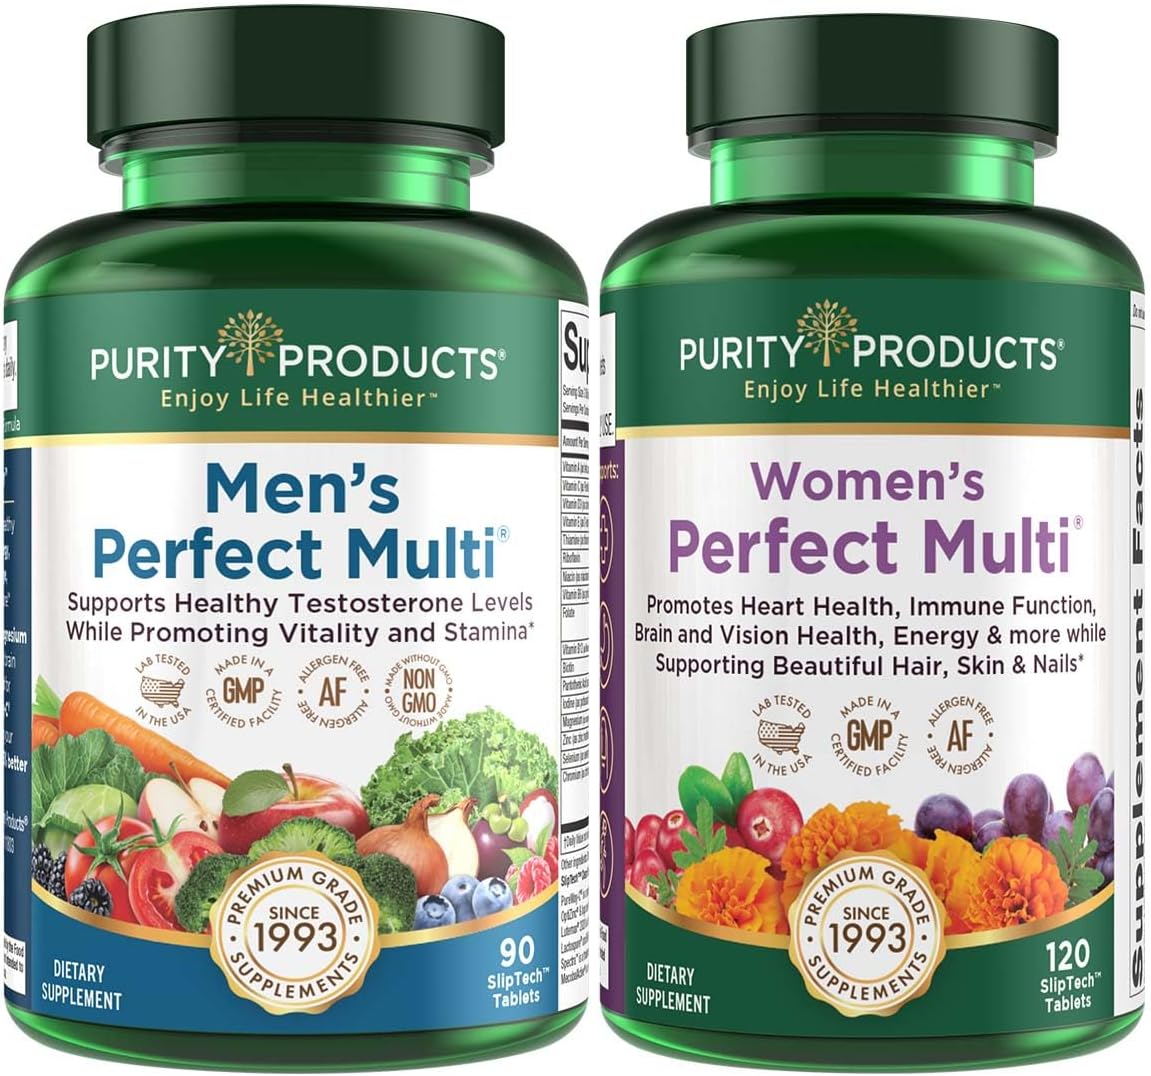 Bundle - Men's Perfect Multi + Women's Perfect Multi by Purity Products - Men - Supports Healthy Vitality, Energy + More - Women - Supports Urinary Tract Health, Immunity, Hair Skin Nails + More